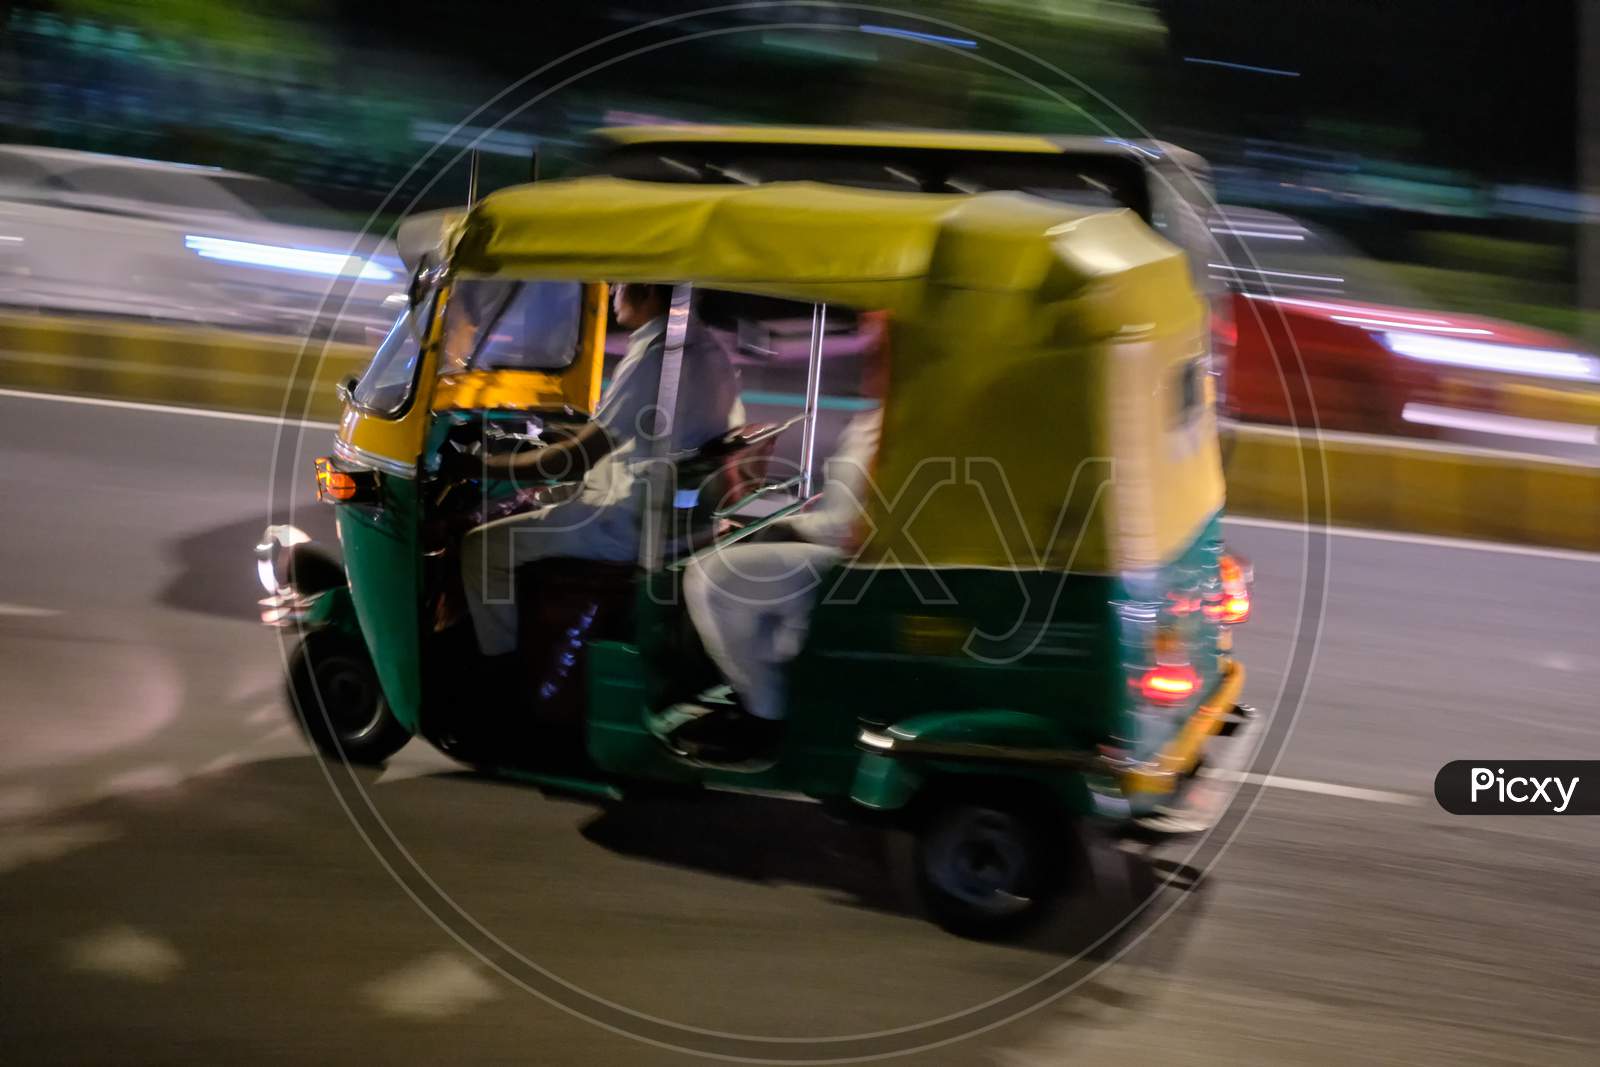 Tuk Tuk In Motion Driving In The Streets Of New Delhi, India, At Night